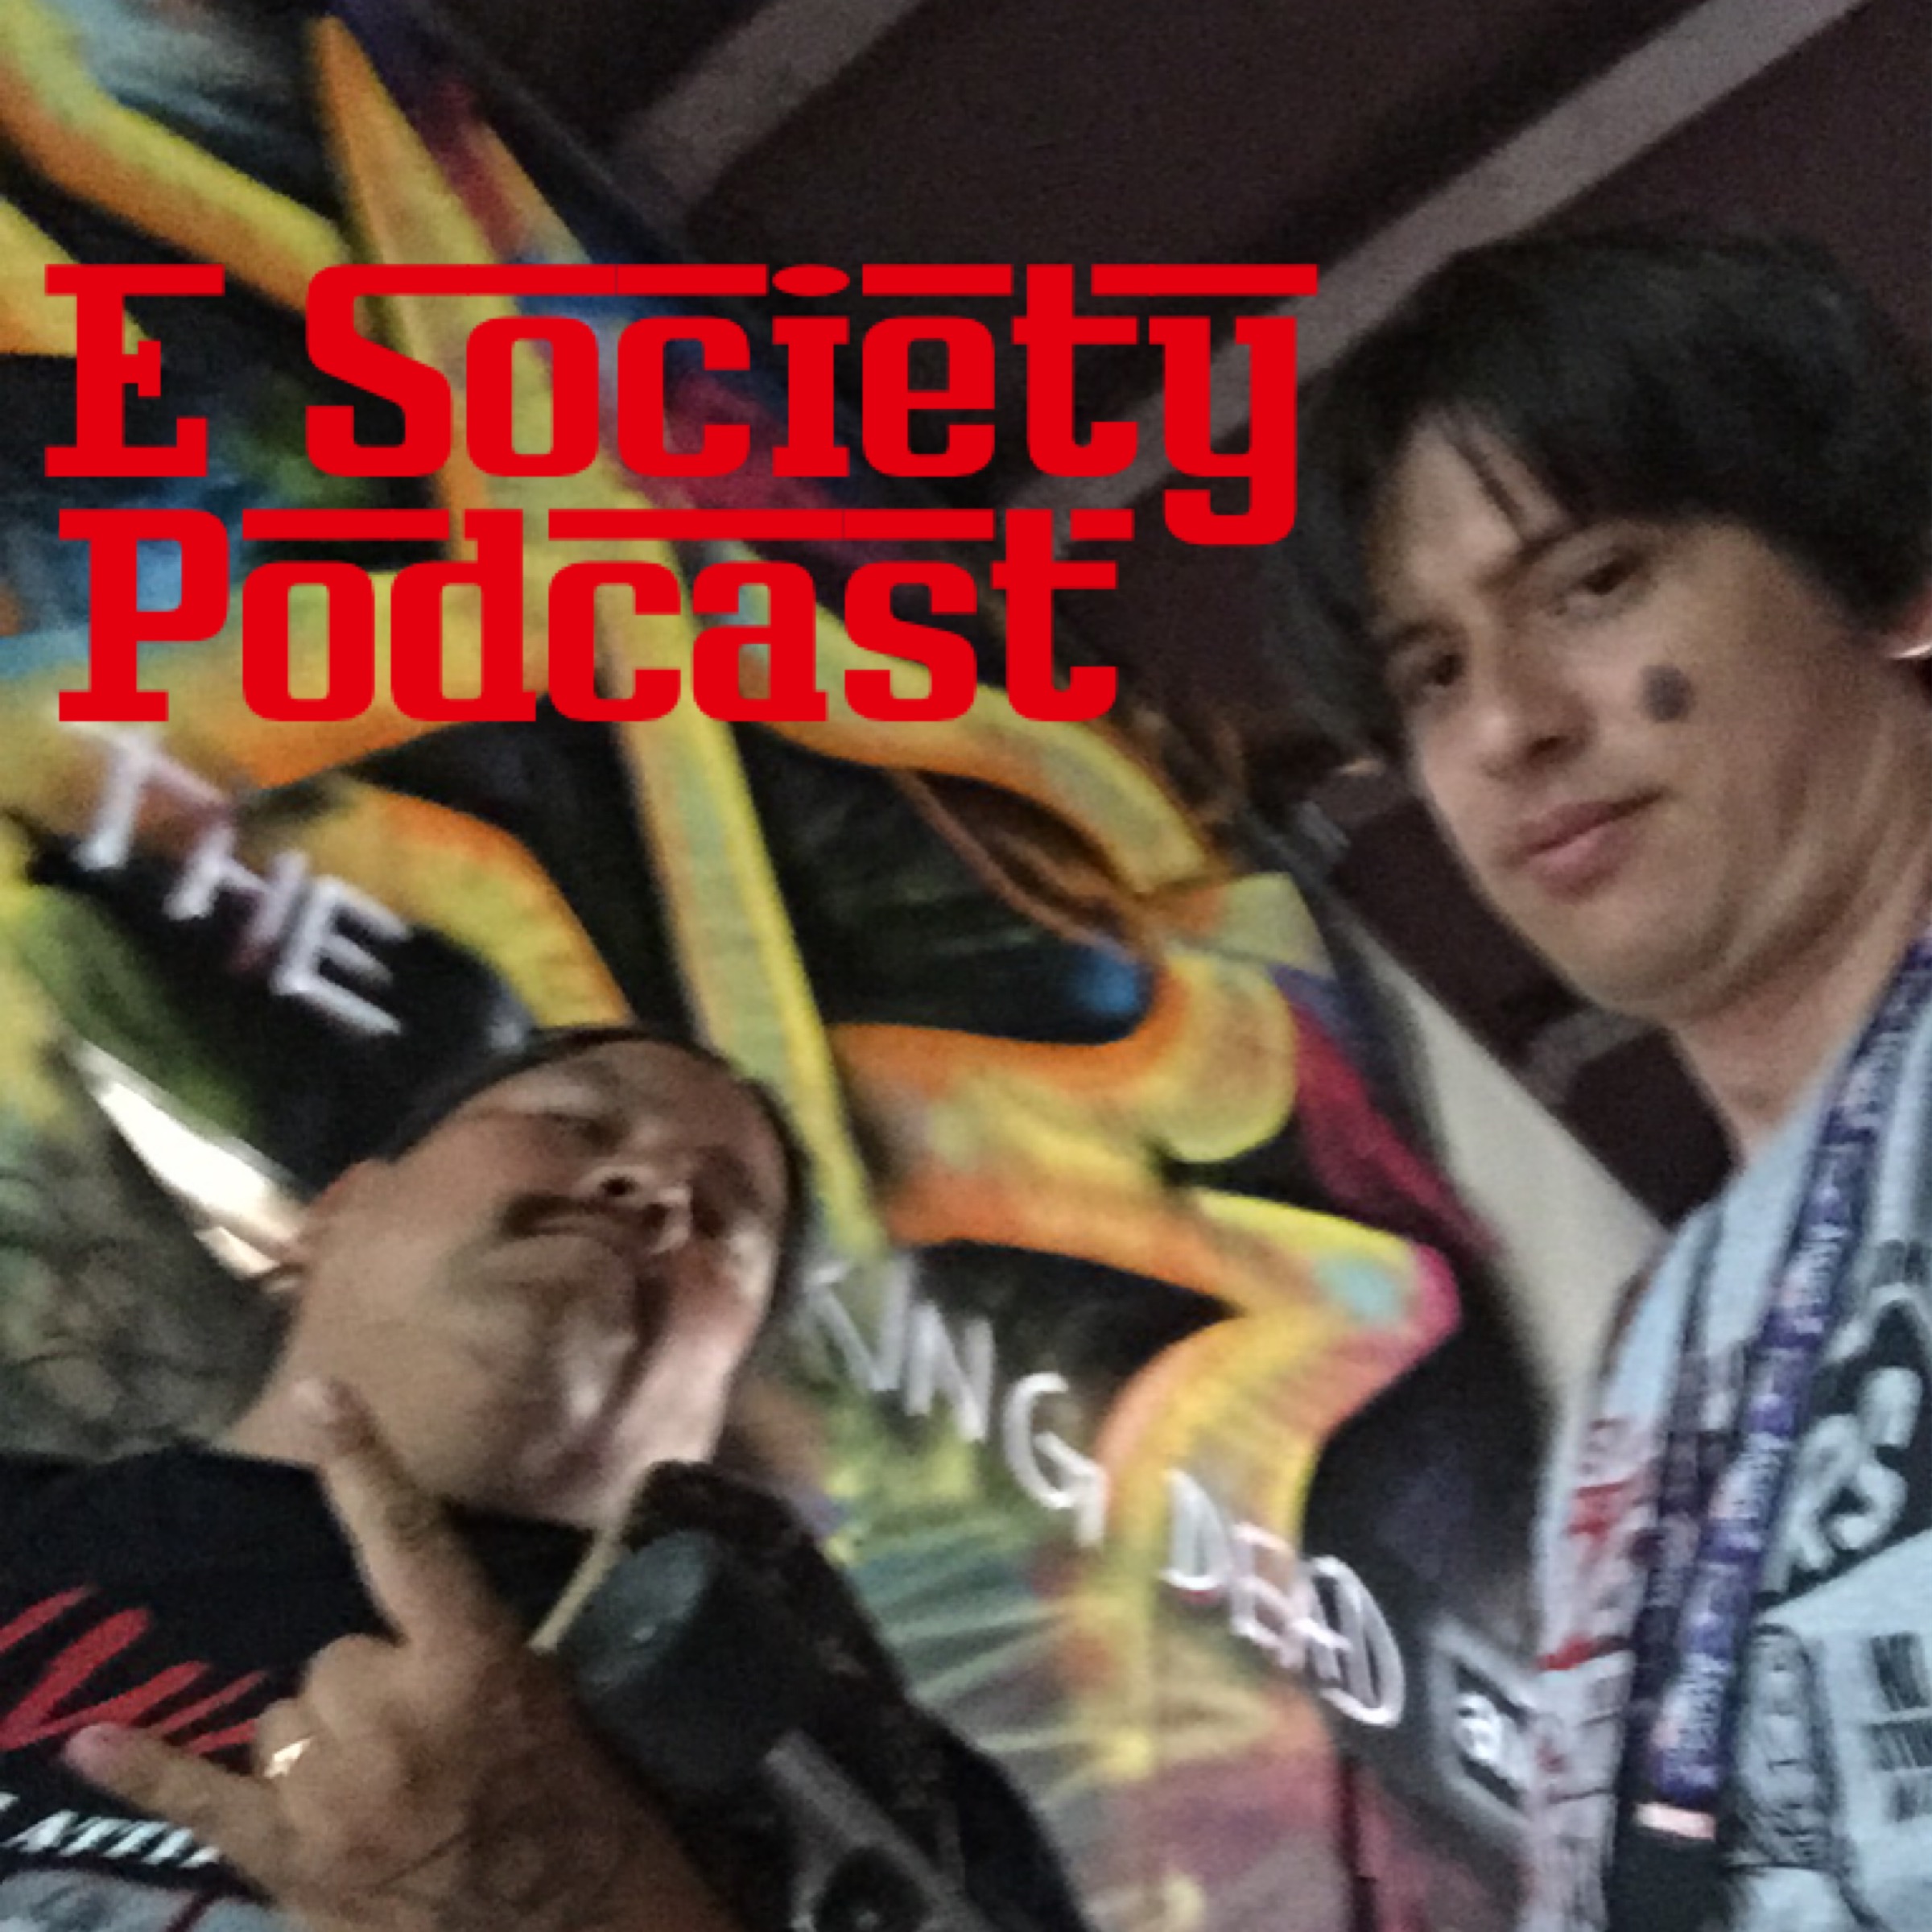 E Society Podcast - Ep. 72: Acquire currency